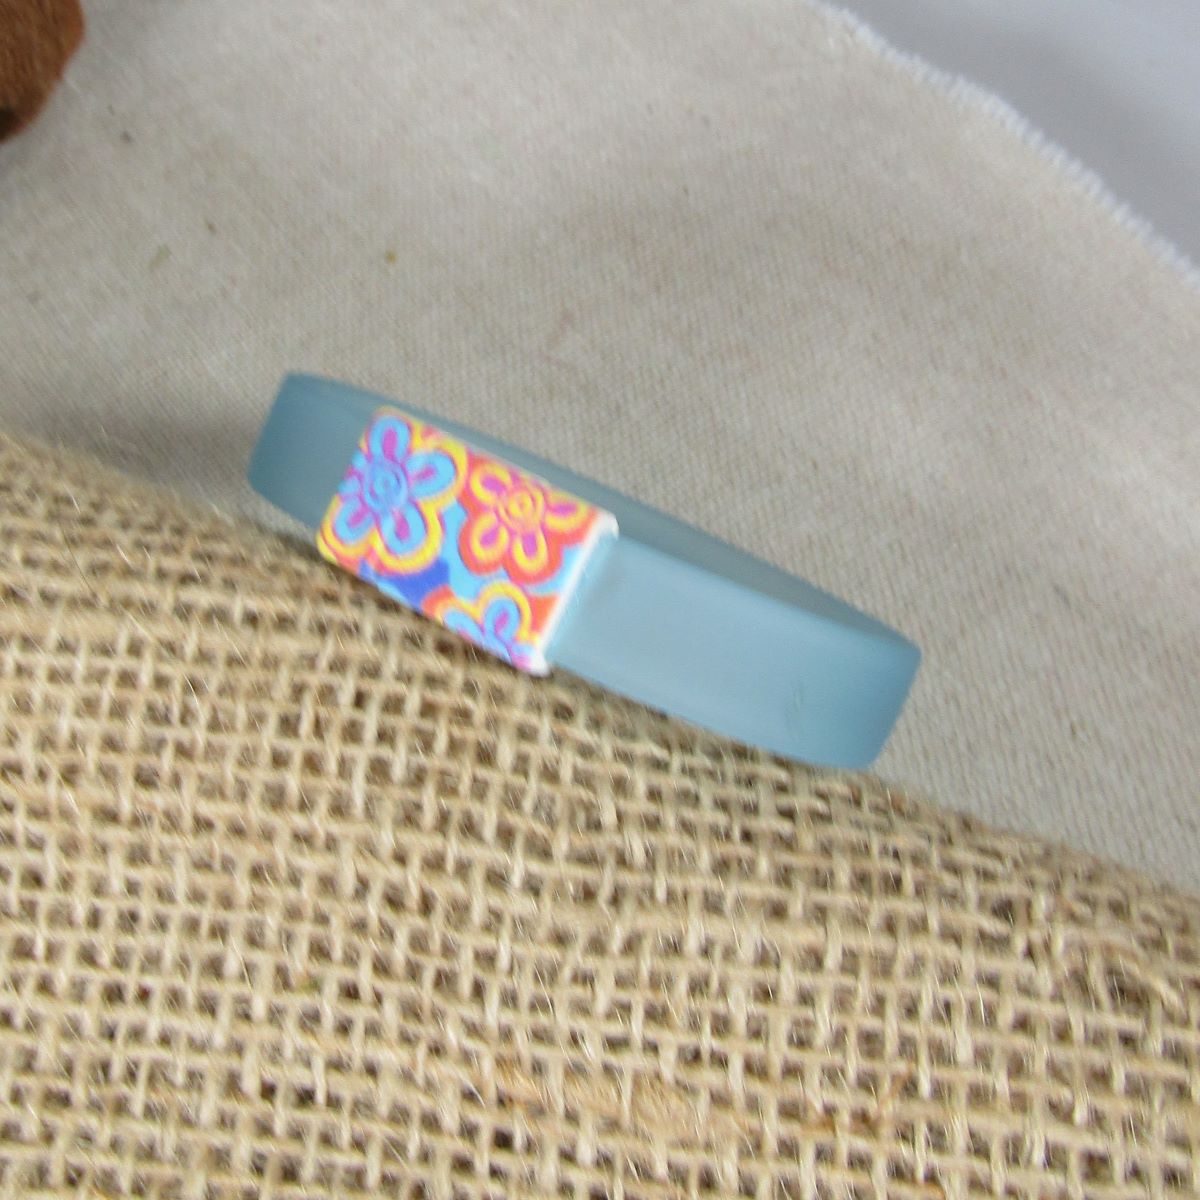 Blue Vinyl Bracelet with Cute Floral Clasp for a Child - VP's Jewelry